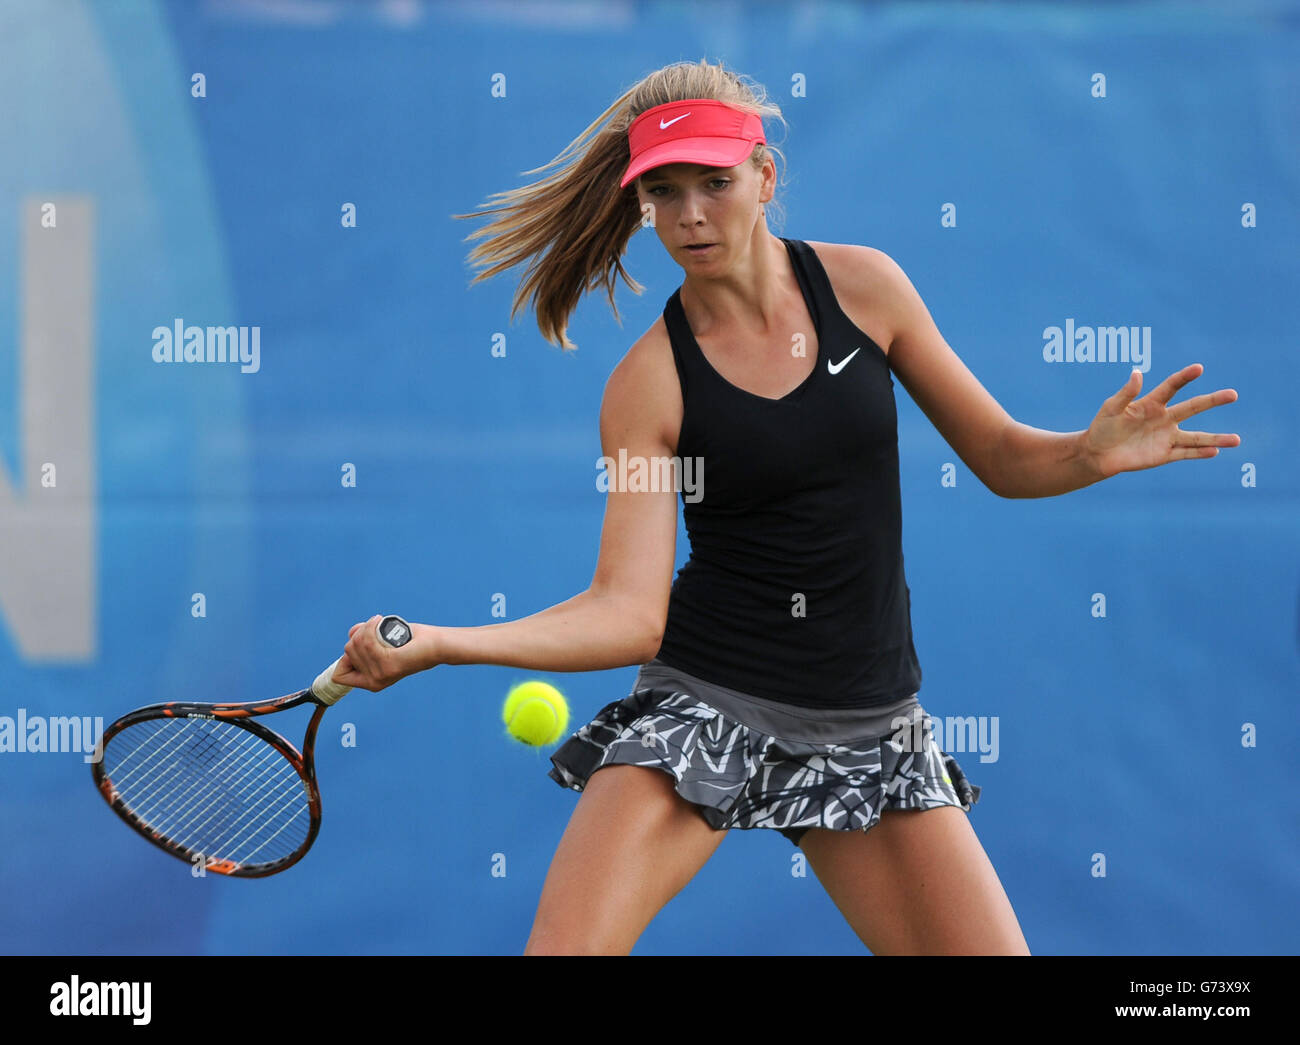 Great Britain's Katie Boulter in action against Paraguay's Veronica Cepede Royg during the AEGON Nottingham Challenge at The Nottingham Tennis Centre, Nottingham. Stock Photo